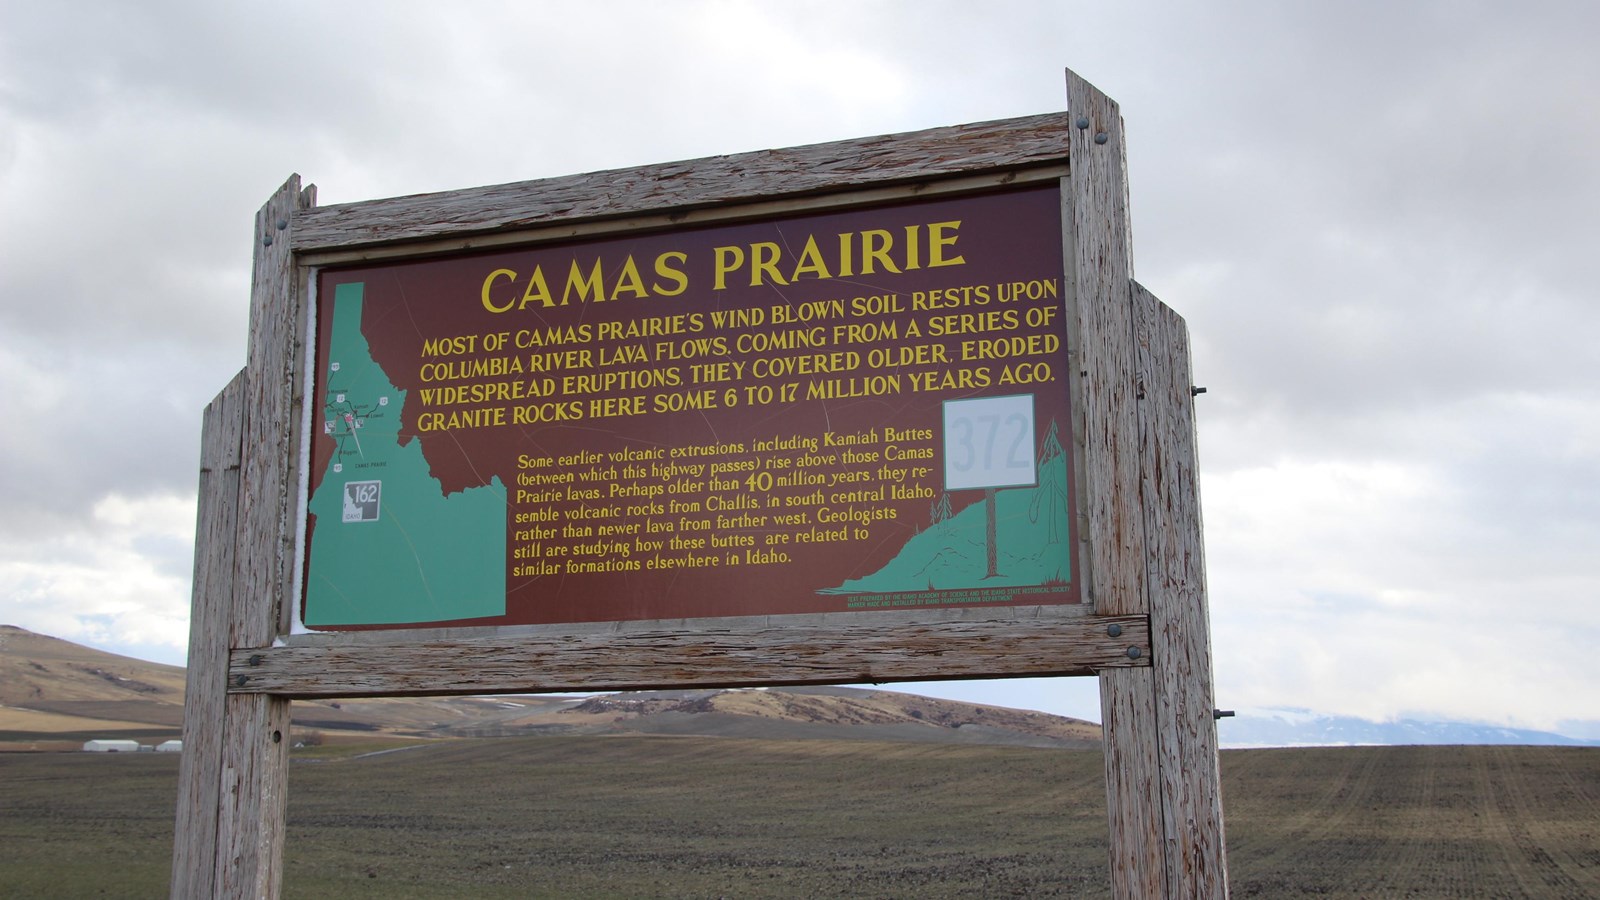 A large wooden sign for Camas Prairie with an open field behind it